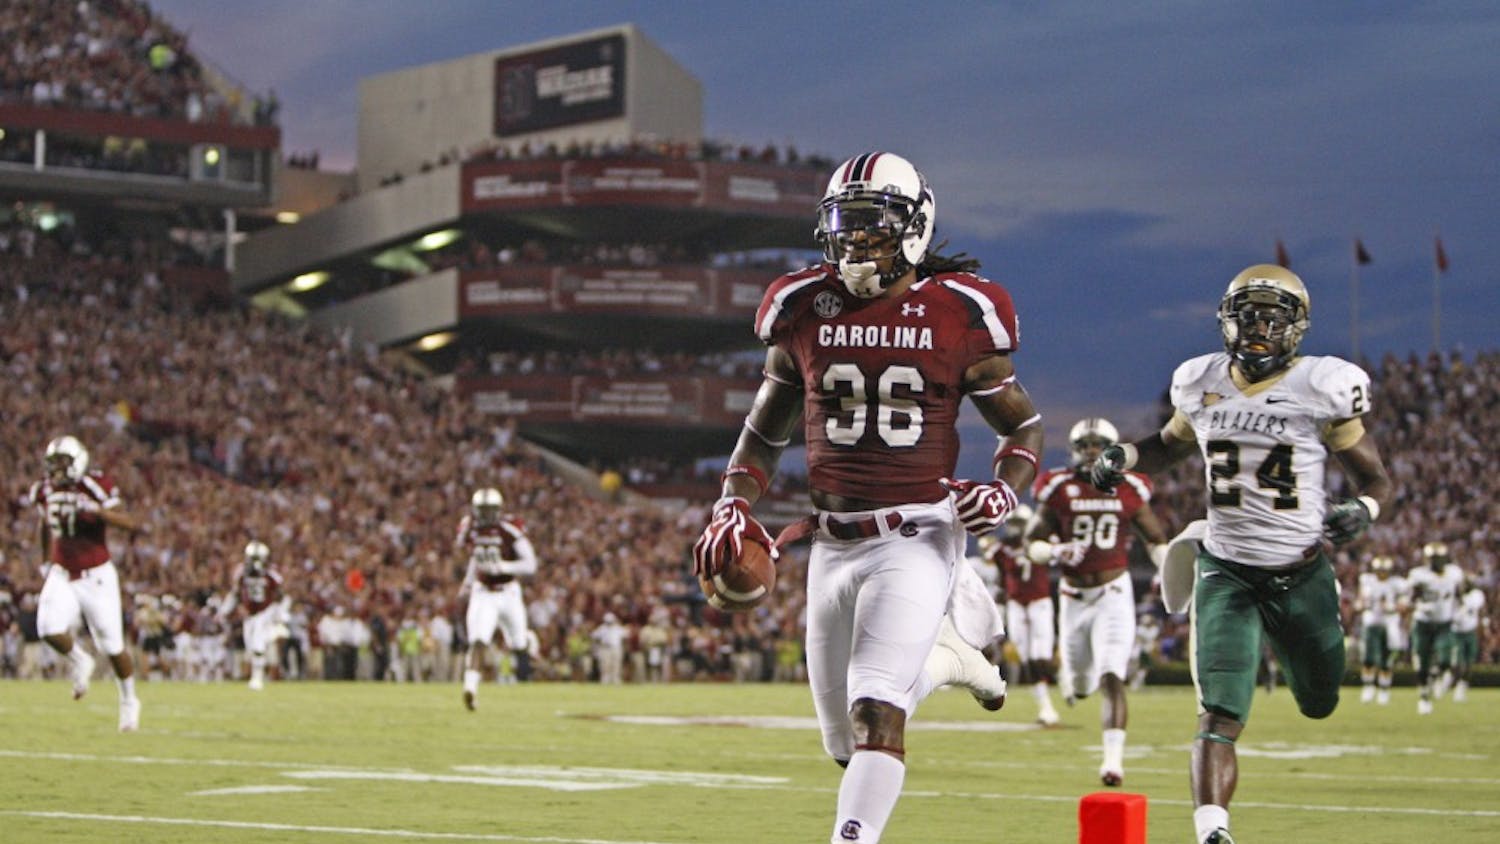 South Carolina safety D.J. Swearinger (36) scores a touchdown after recovering a fumble in the first quarter against Alabama-Birmingham at Williams-Brice Stadium in Columbia, South Carolina, on Saturday, September 15, 2012. (Gerry Melendez/The State/MCT)